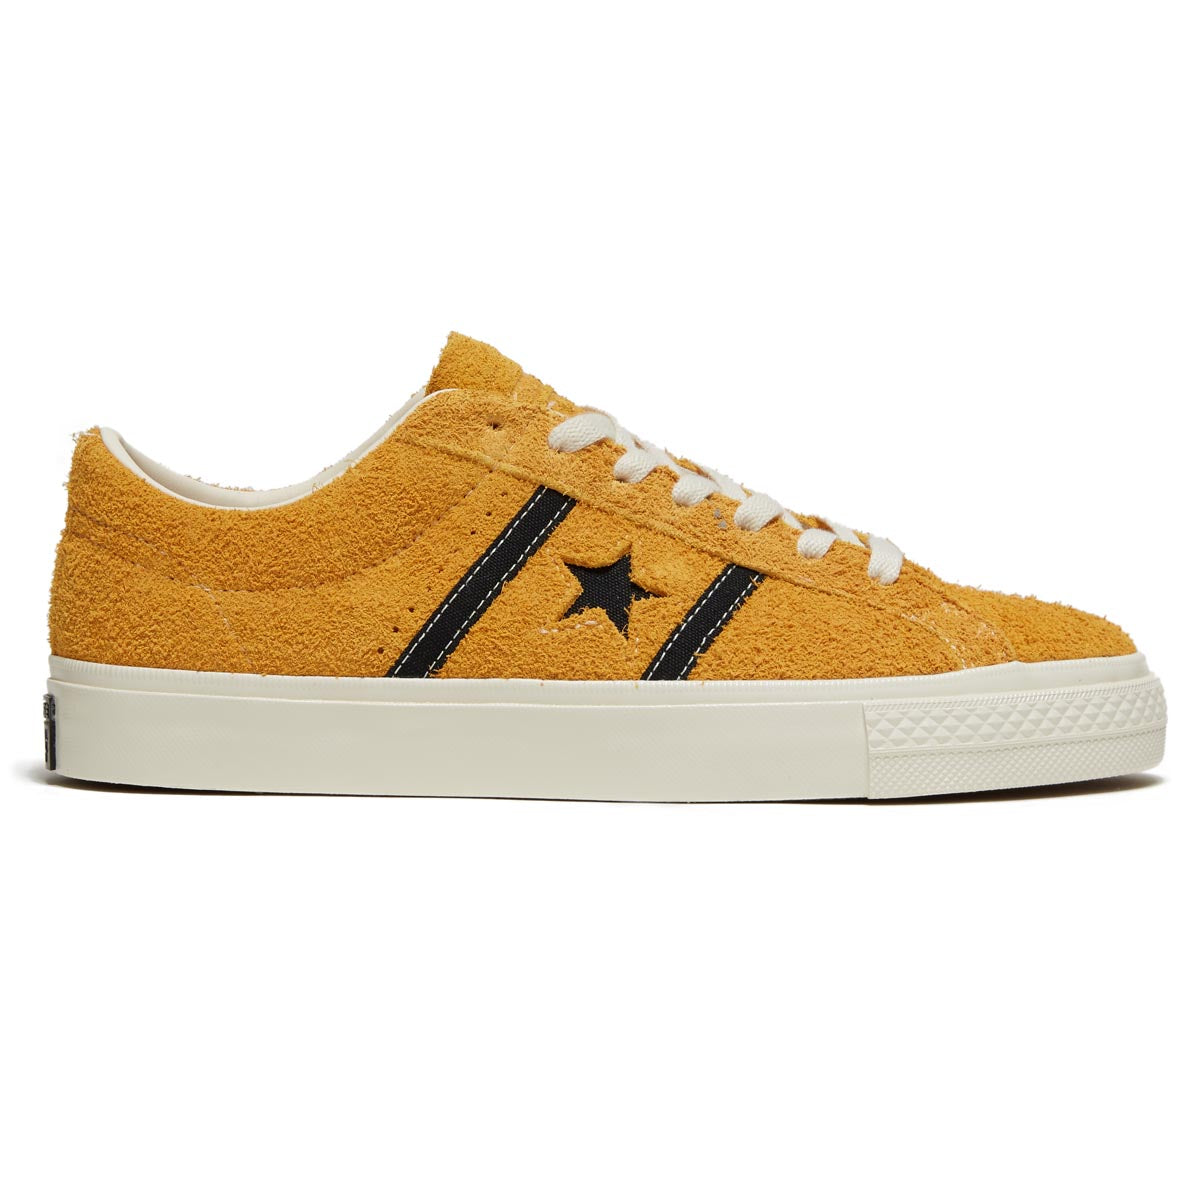 Converse One Star Academy Pro Suede Ox Shoes - Sunflower Gold/Black/Egret image 1